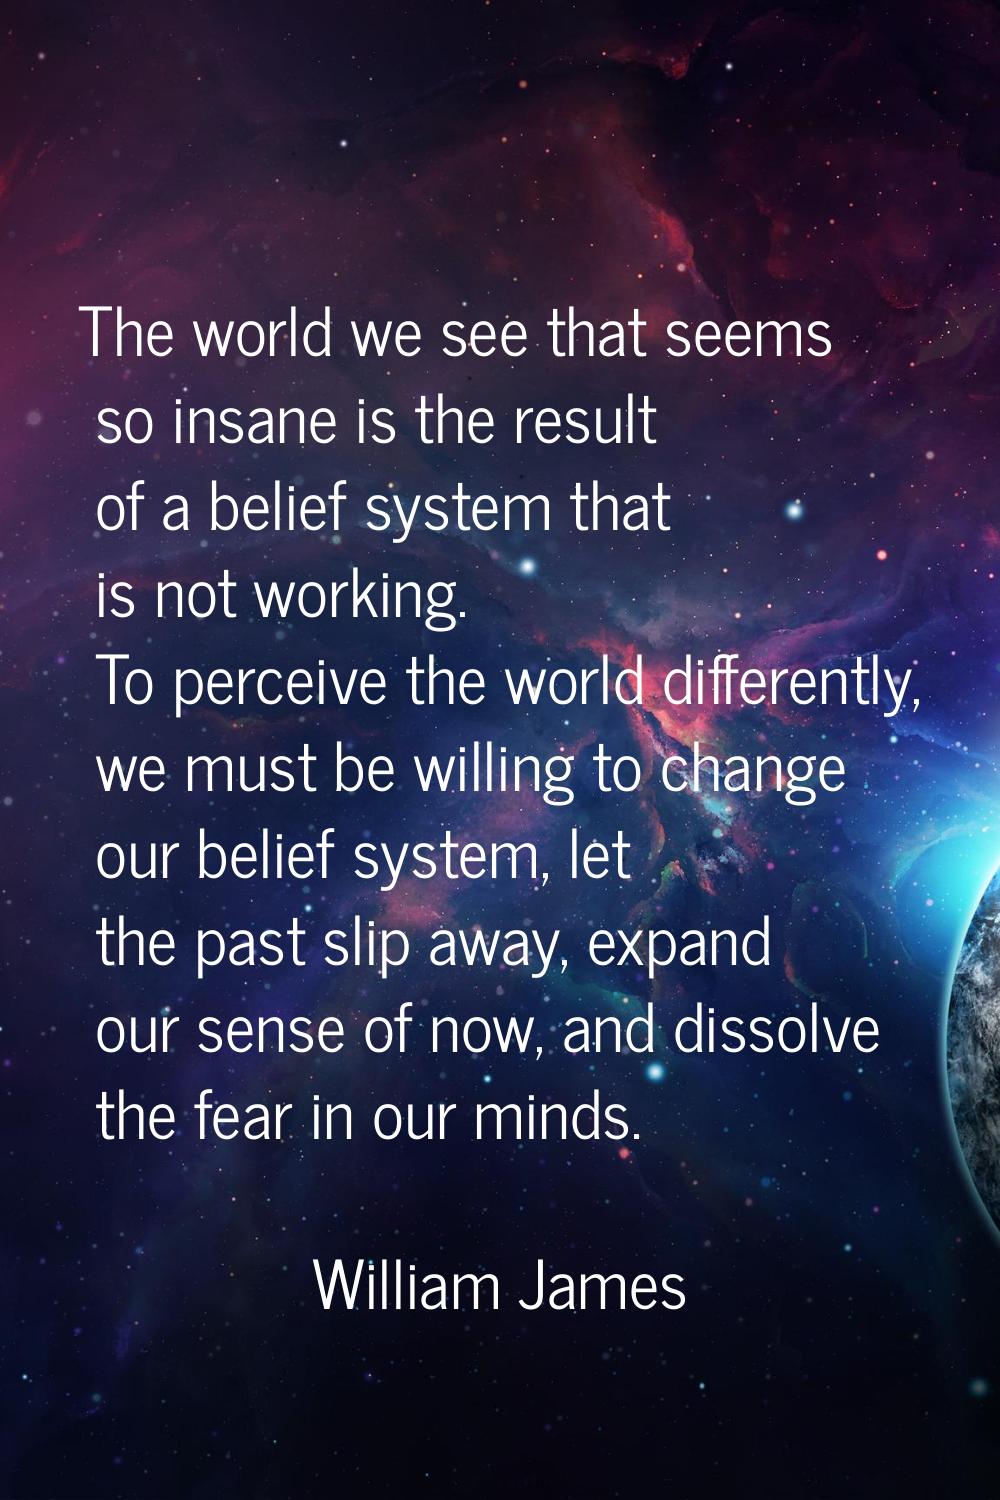 The world we see that seems so insane is the result of a belief system that is not working. To perc